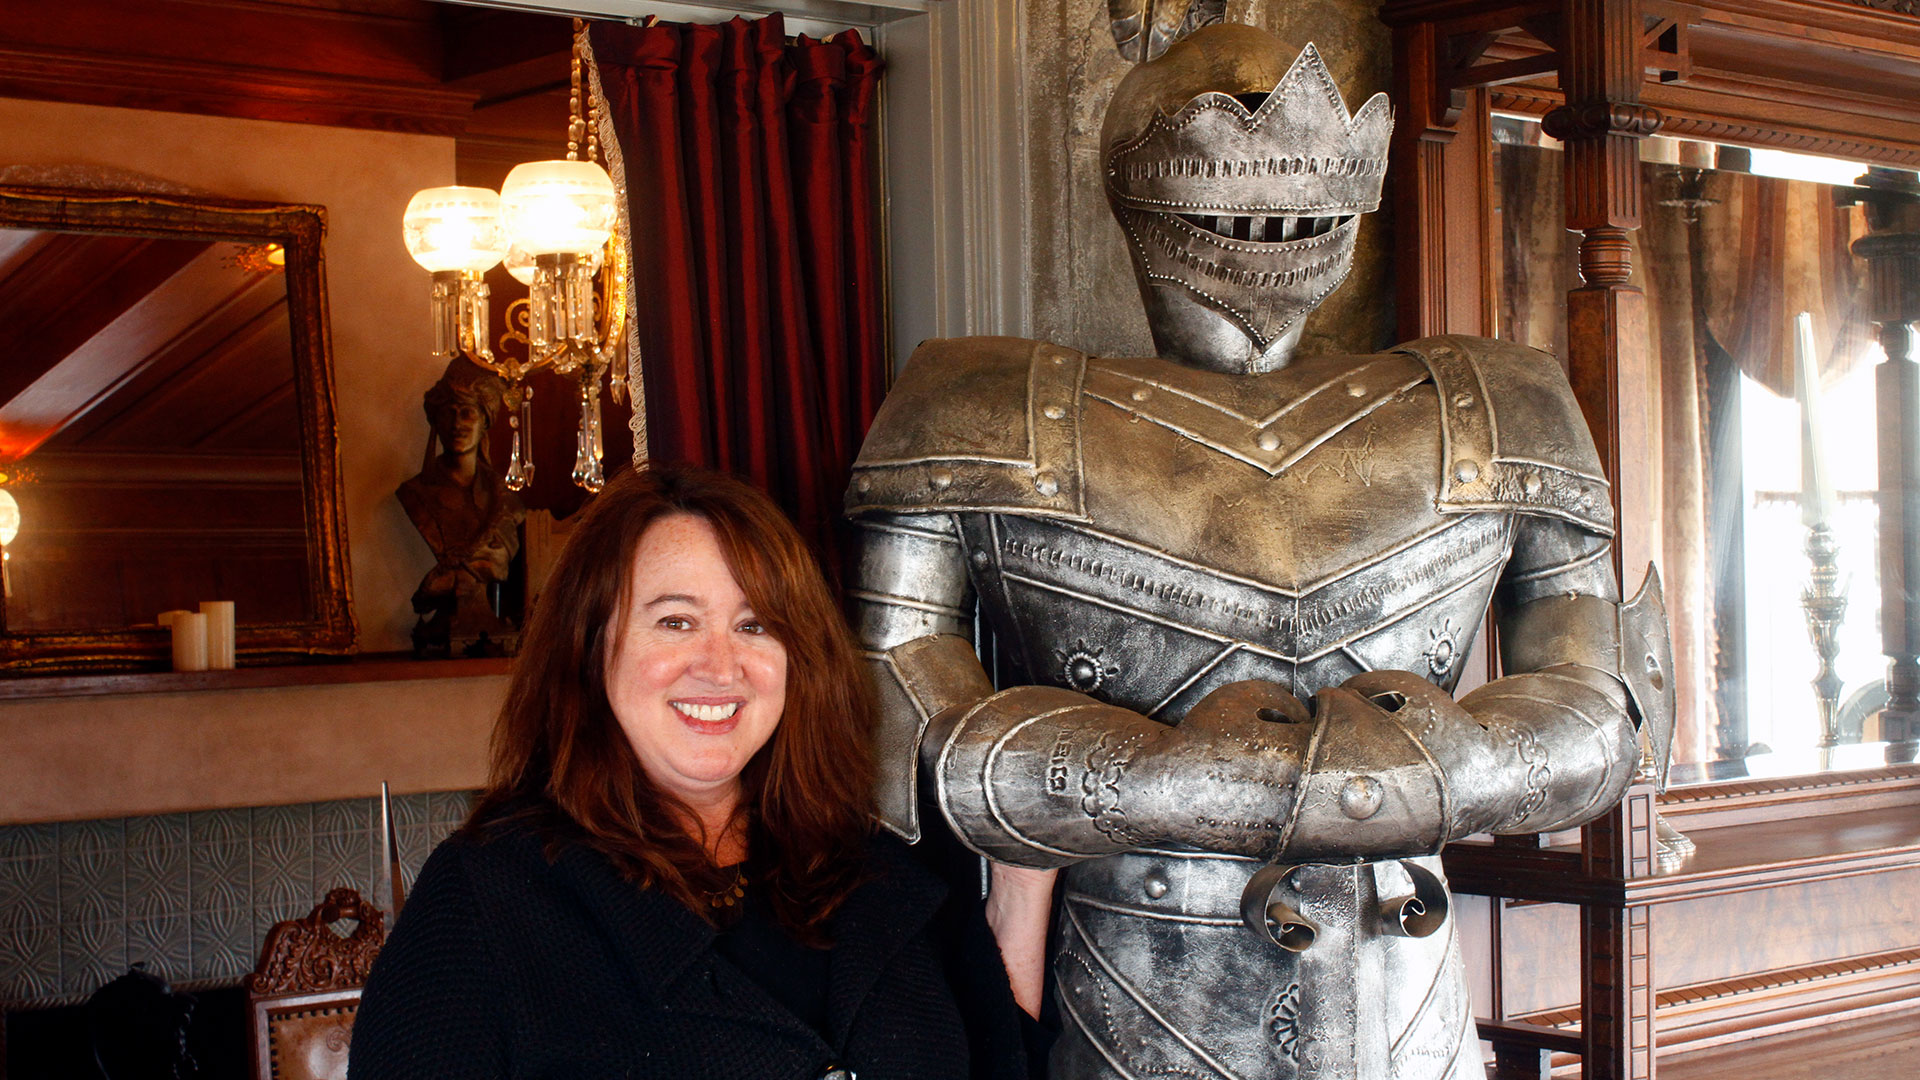 A woman stands next to a large suit of armor in a room full of dark wood.